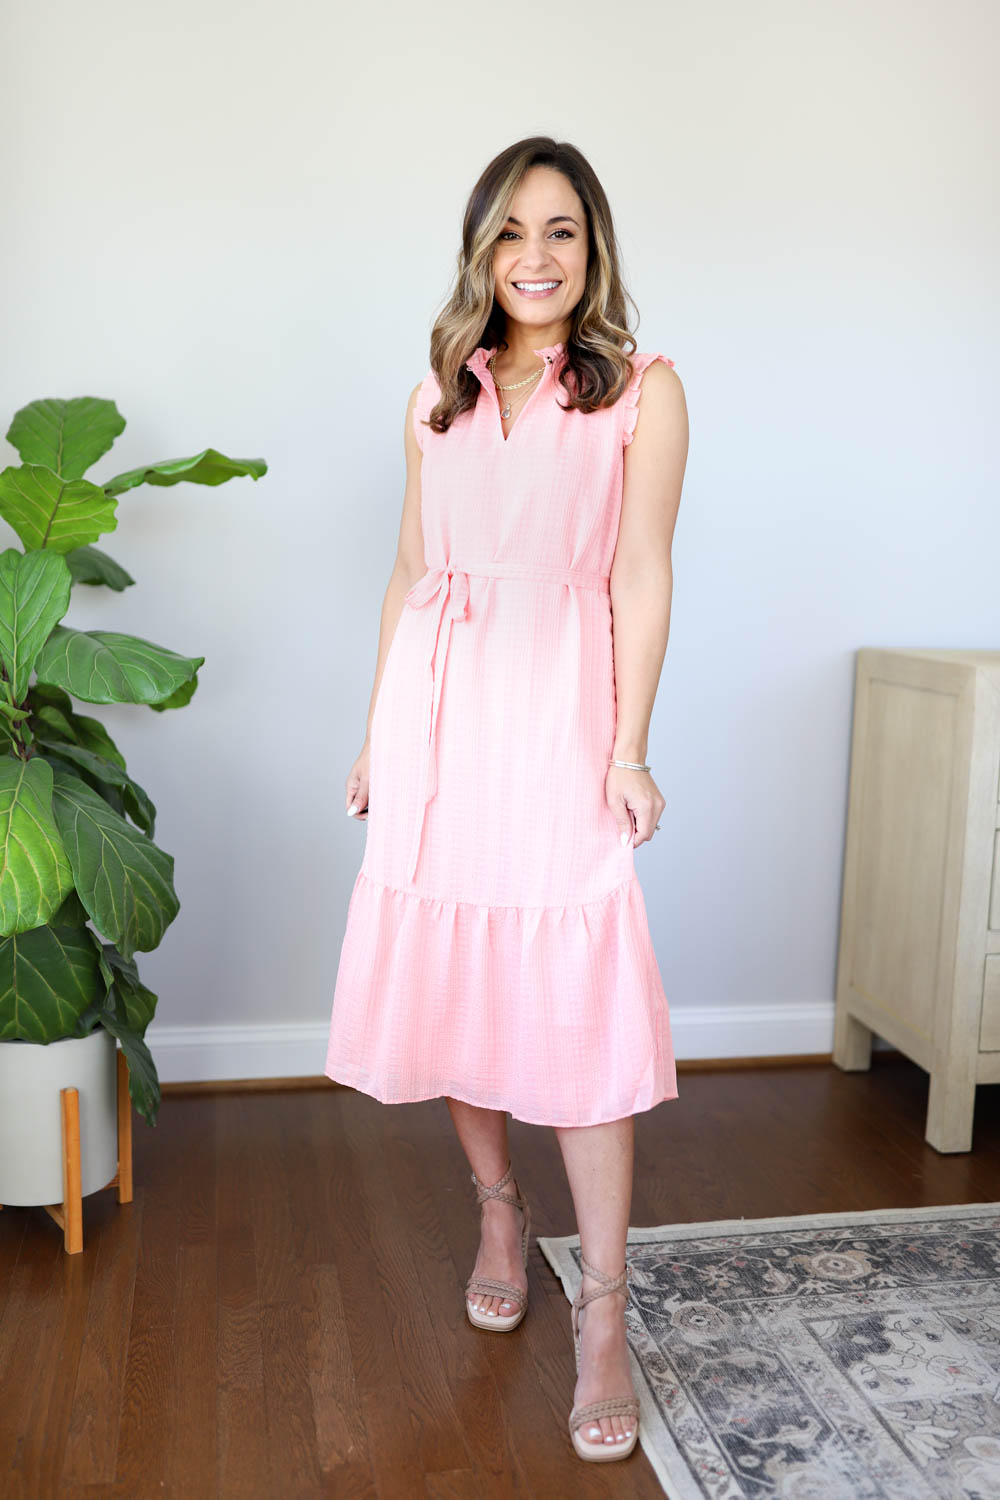 spring and summer dresses | petite friendly dresses | spring dress | seven spring outfits via pumps and push-ups blog 